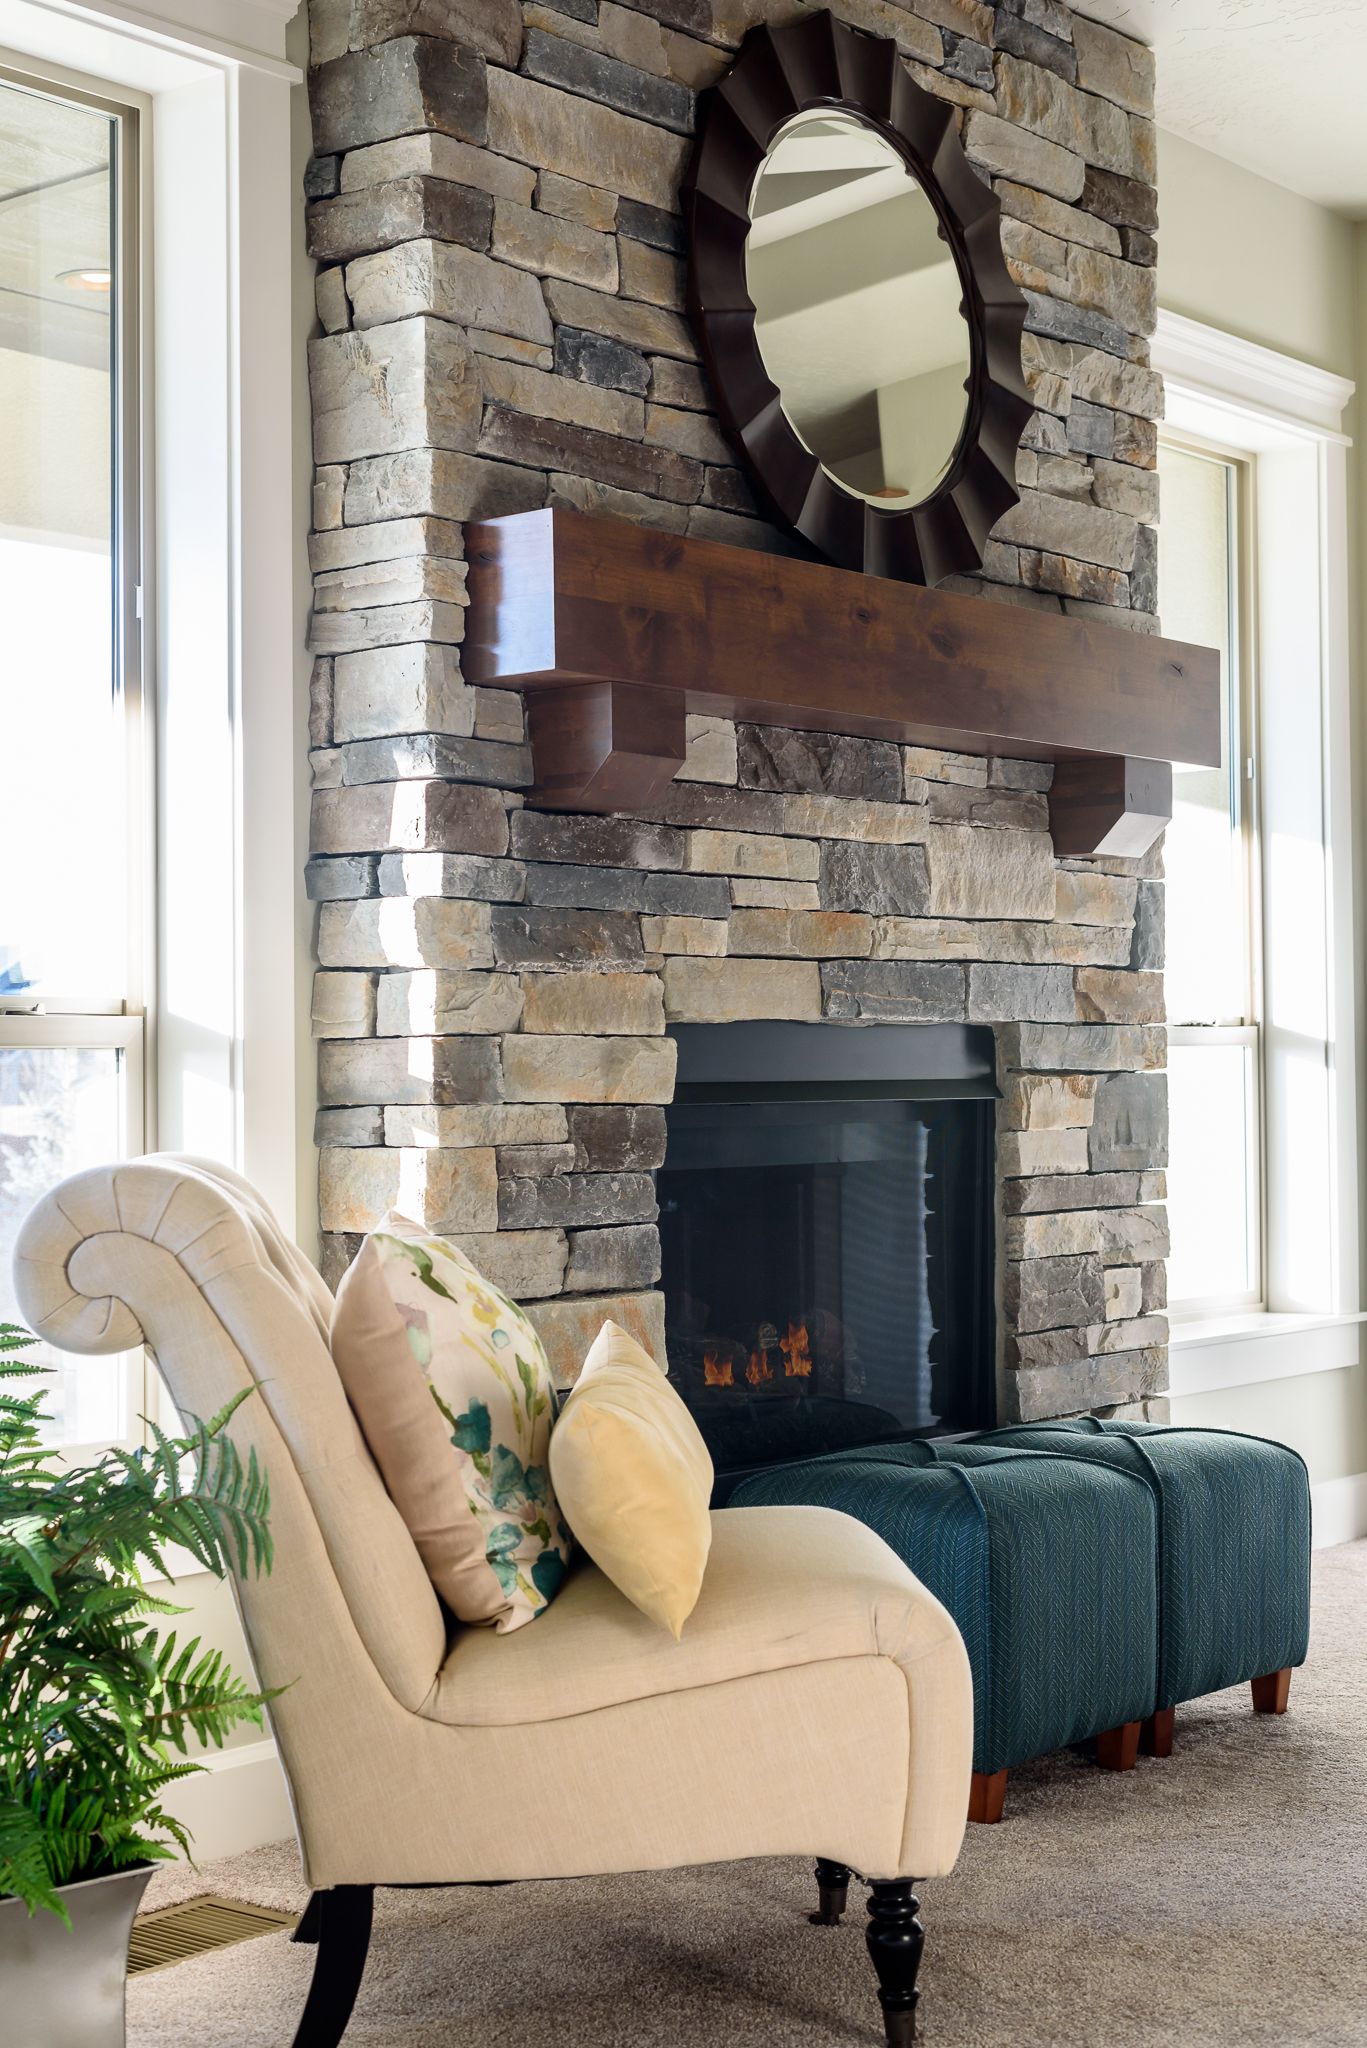 Mobile Home Fireplace Insert Fresh Echo Ridge Country Ledgestone On This Floor to Ceiling Stone